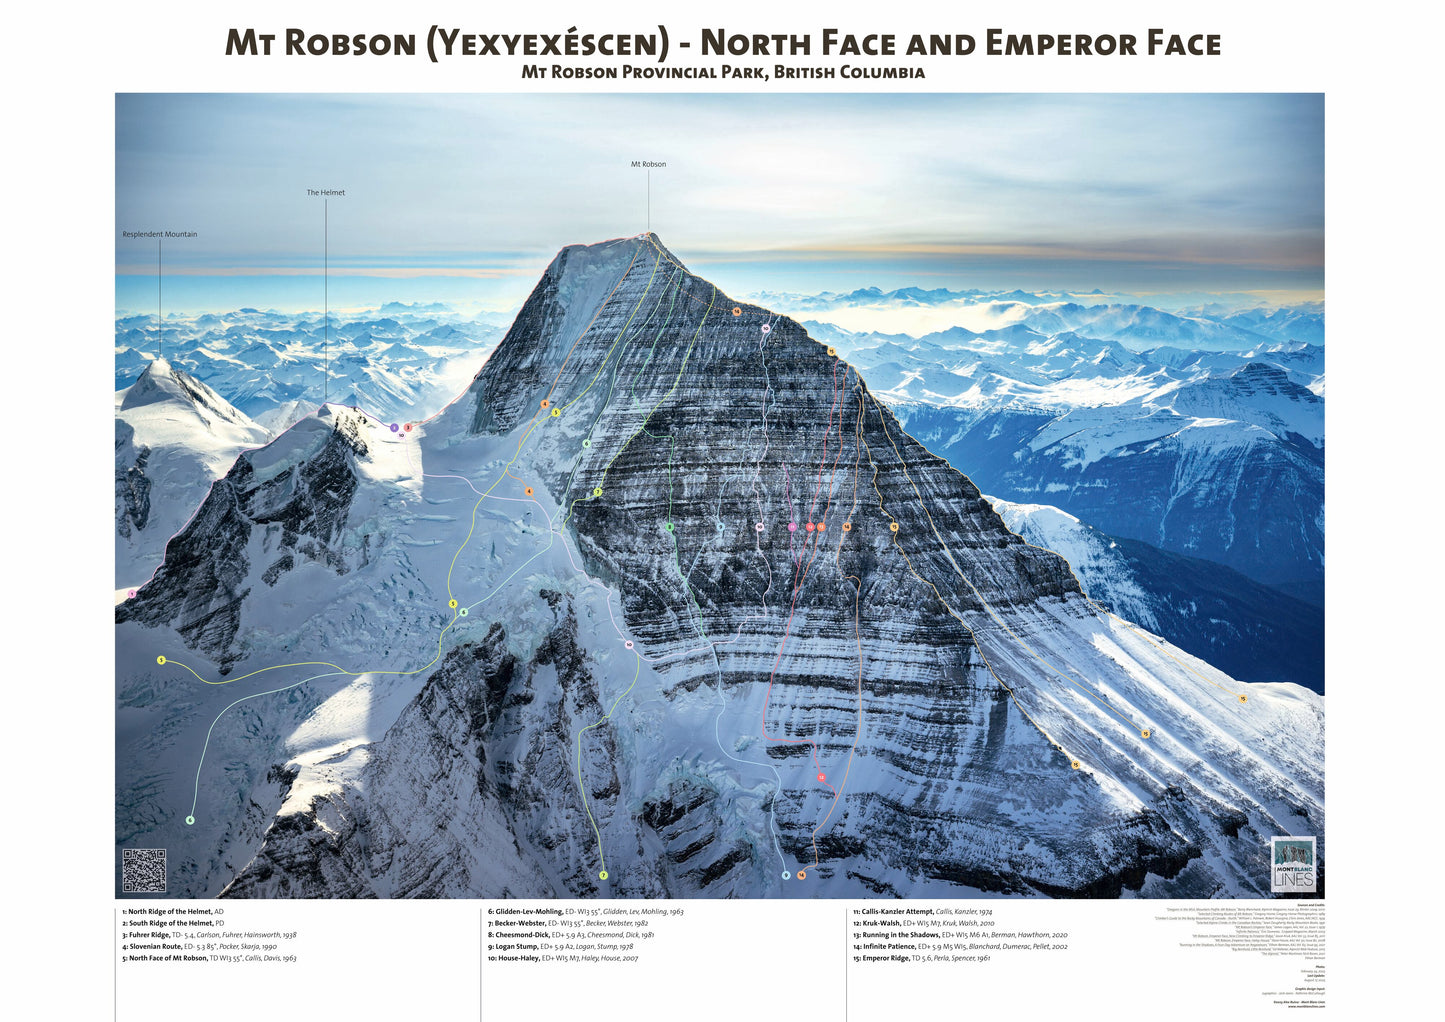 Mount Robson - North Face and Emperor Faces